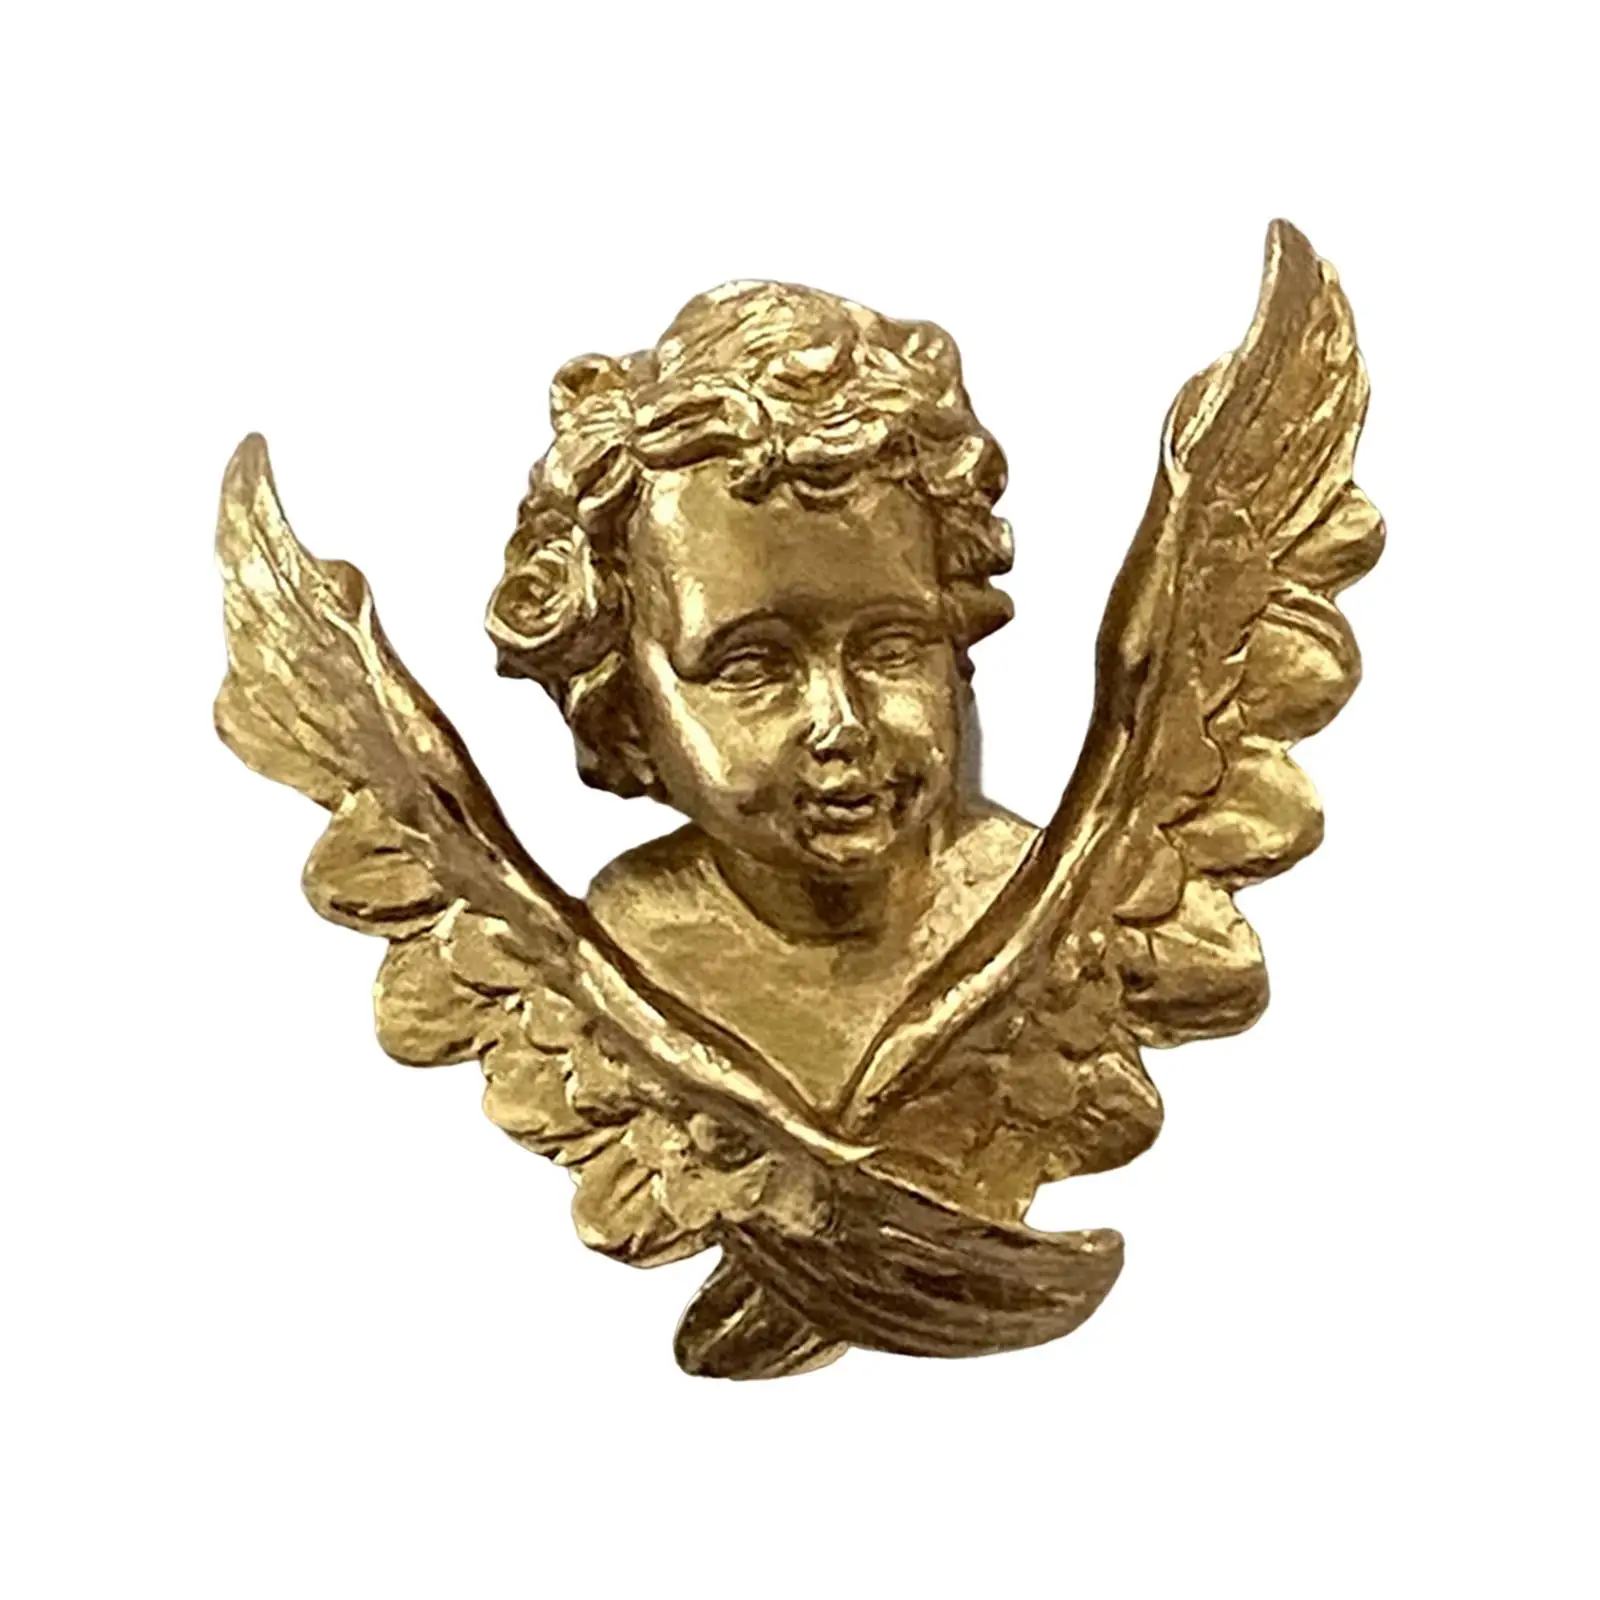 

Lovely Angel Figurines Statue Resin Angel Wall Sculpture Cherub Figurine for Entrance Garden Decorations Collectibles Adornment